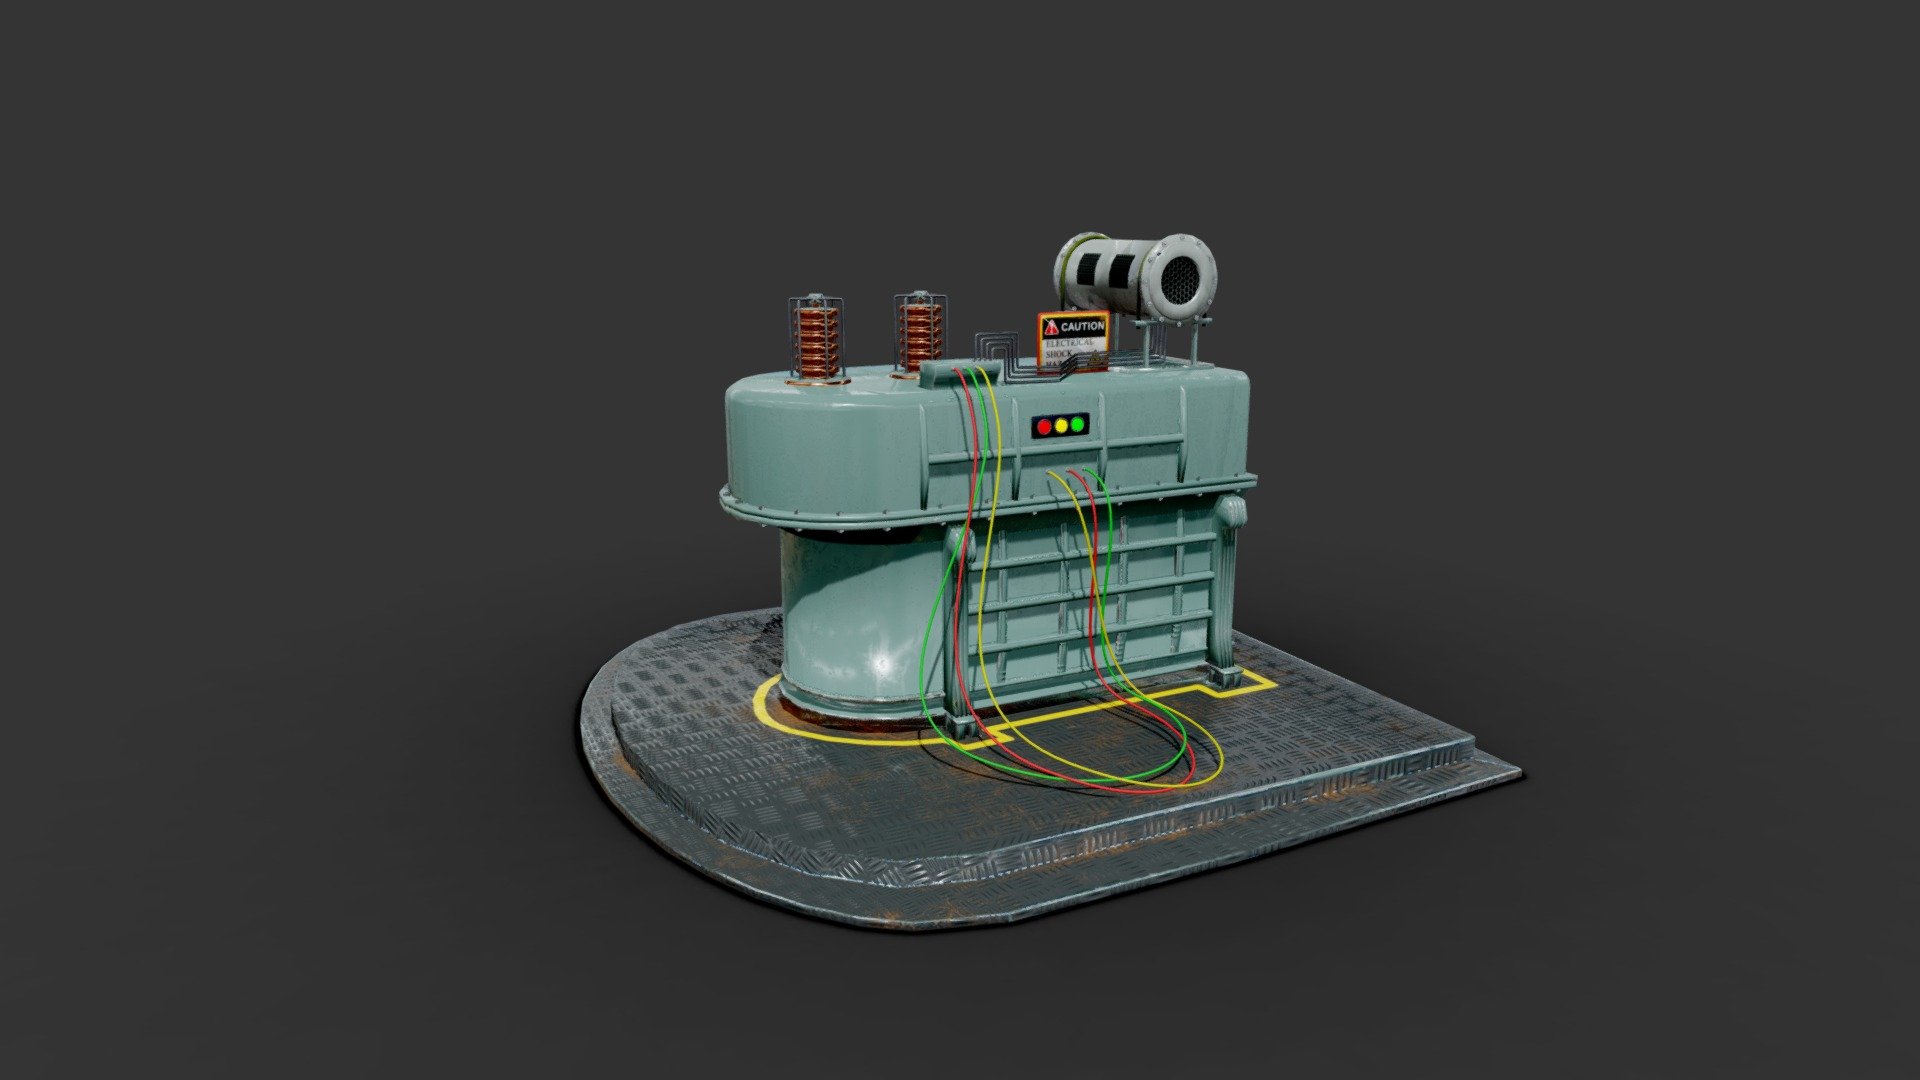 Optimized 3D model of an old transformer created by us for a Oculus Quest 2 VR application developed with Unity Universal Render Pipeline 3d model